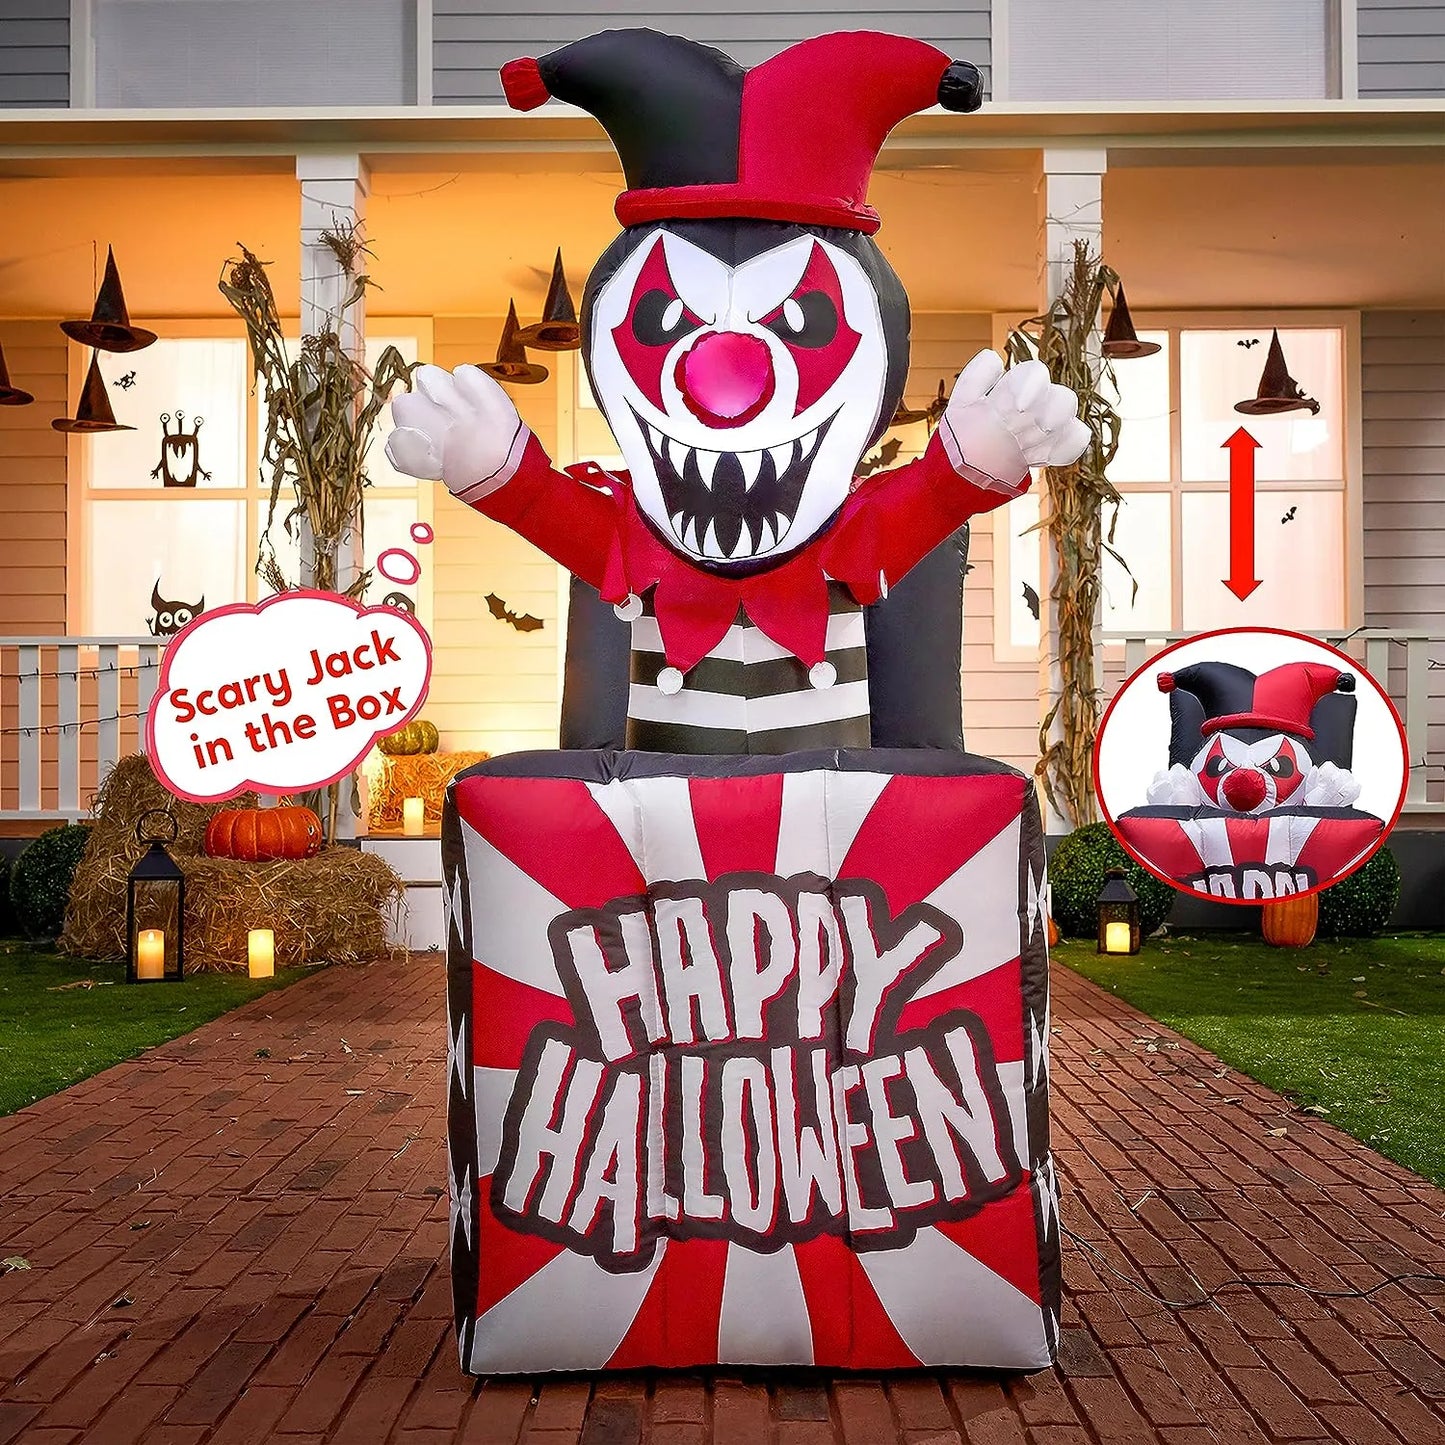 Joiedomi 5ft Halloween Inflatable LED Animated Jester in The Box